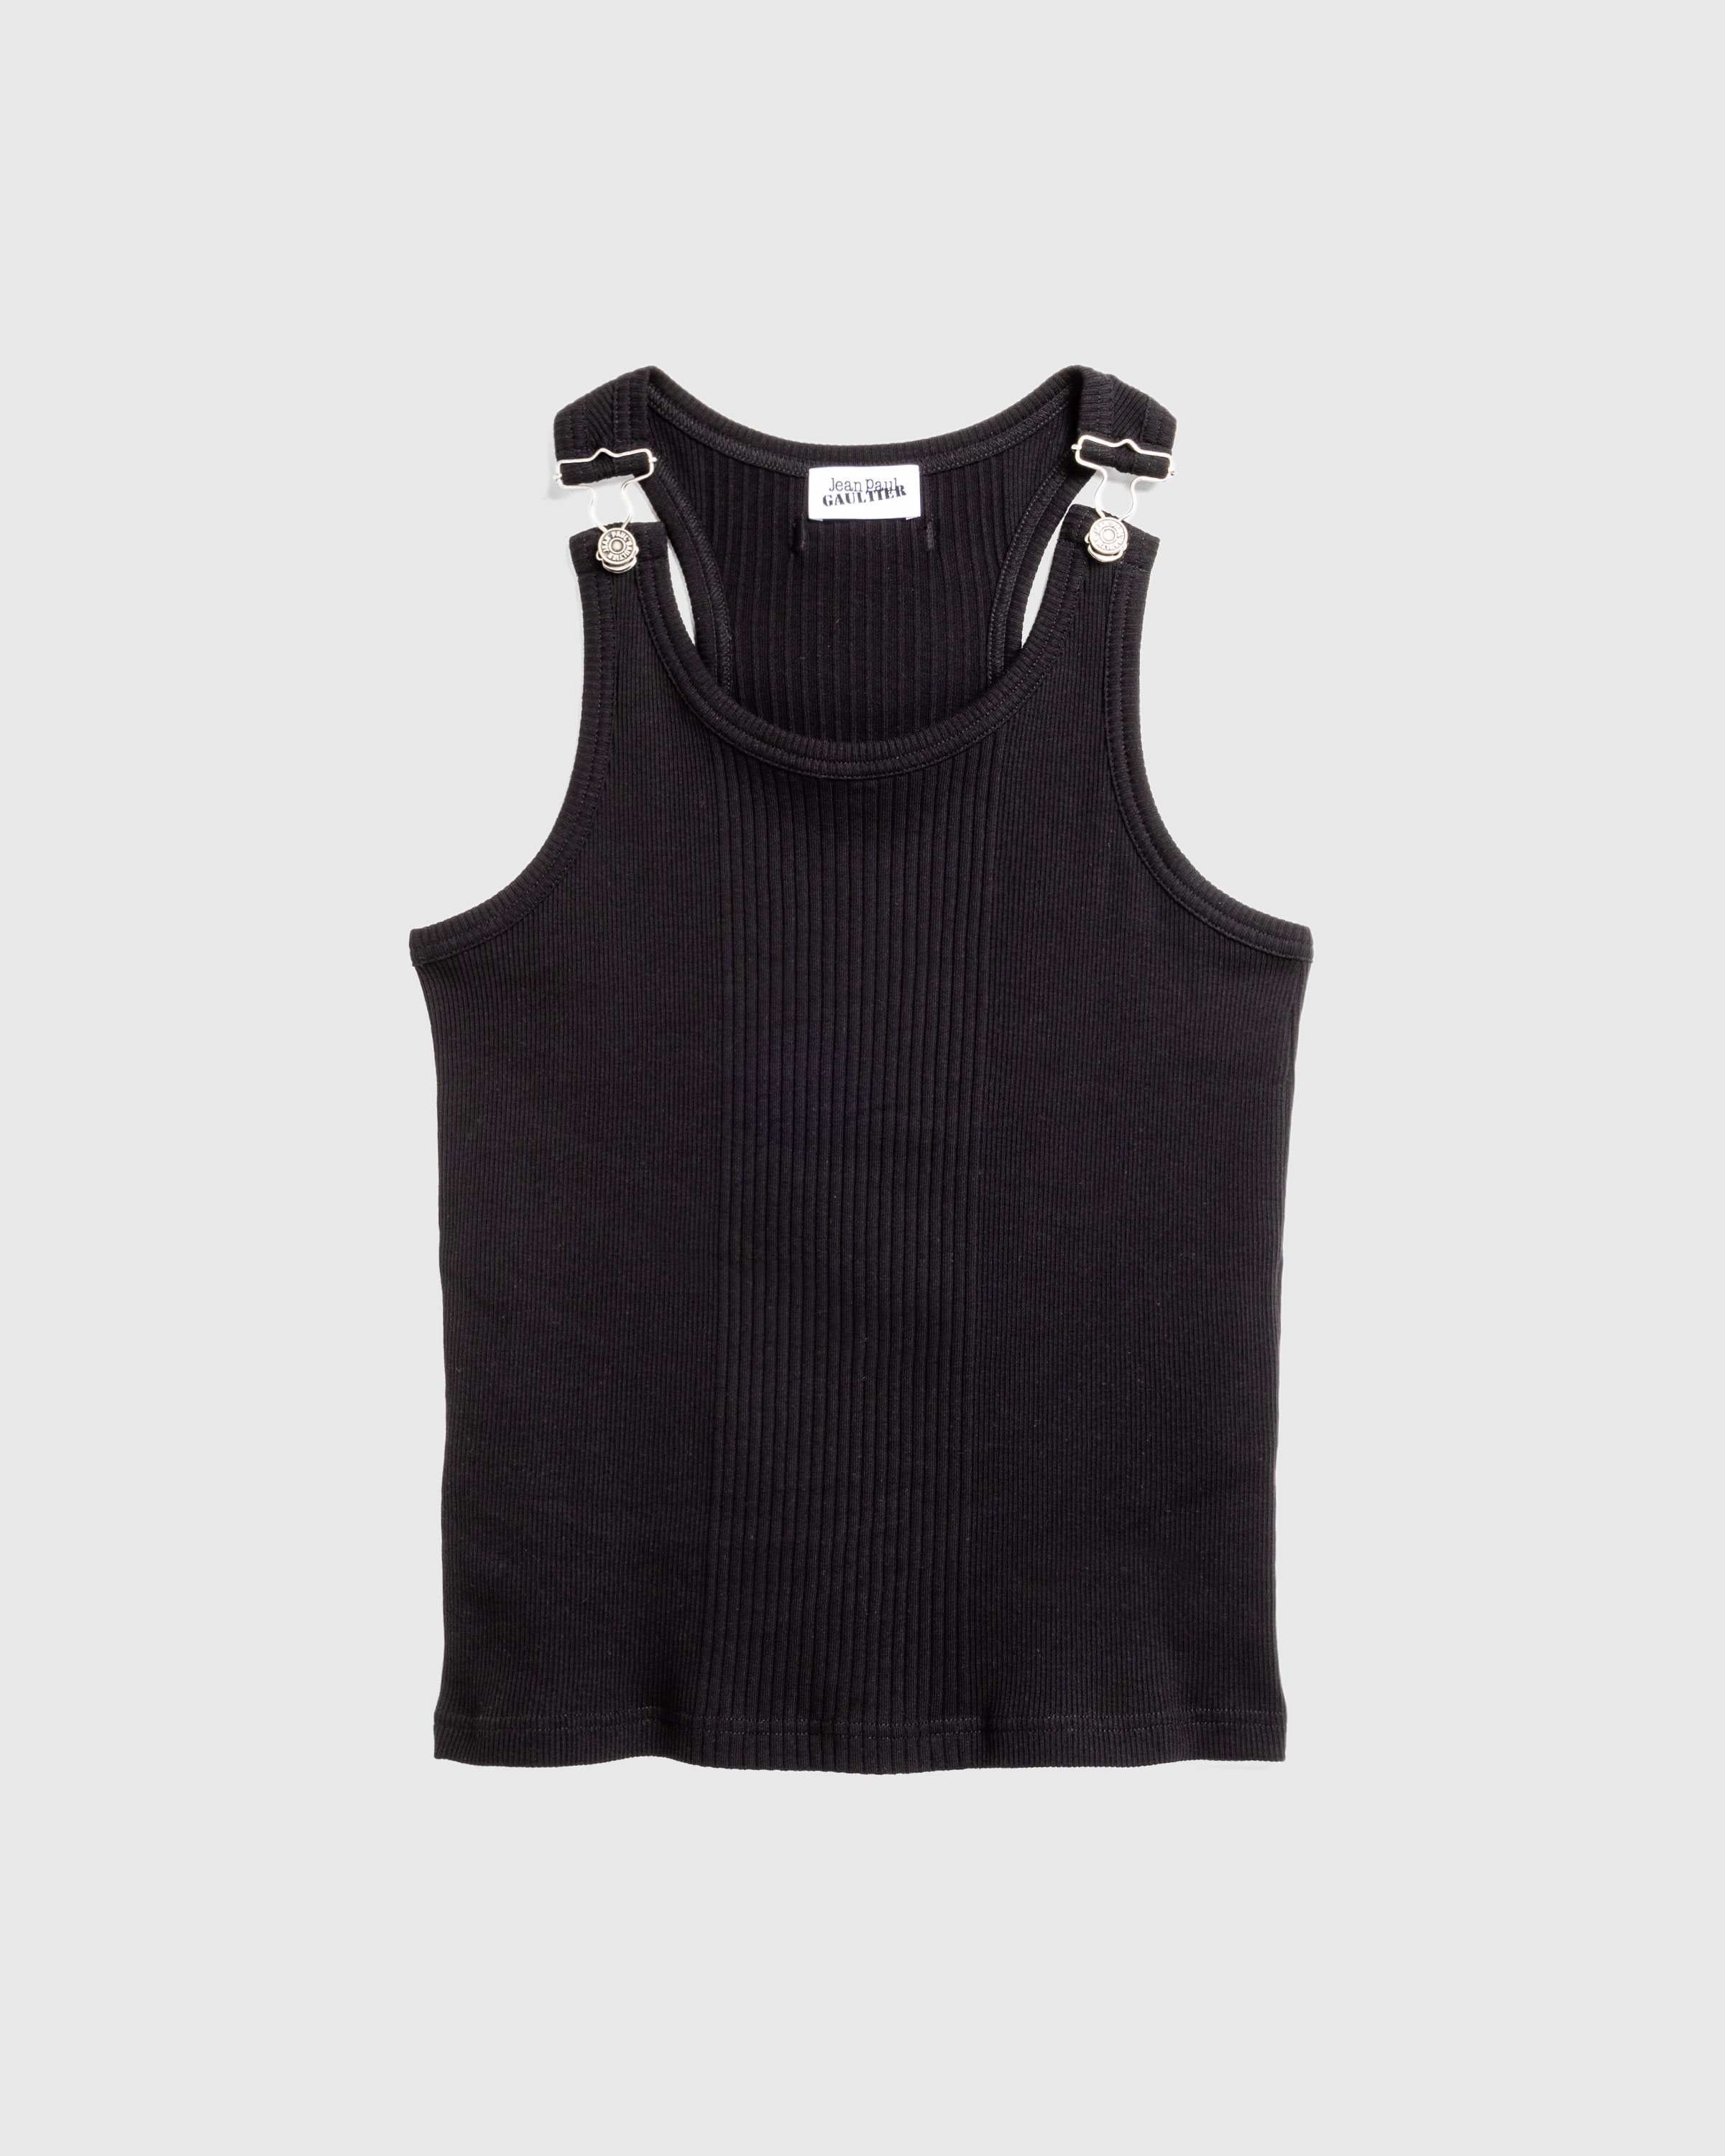 Jean Paul Gaultier – Ribbed Tank Top With Overall Buckles Black - Tank Tops - Black - Image 1